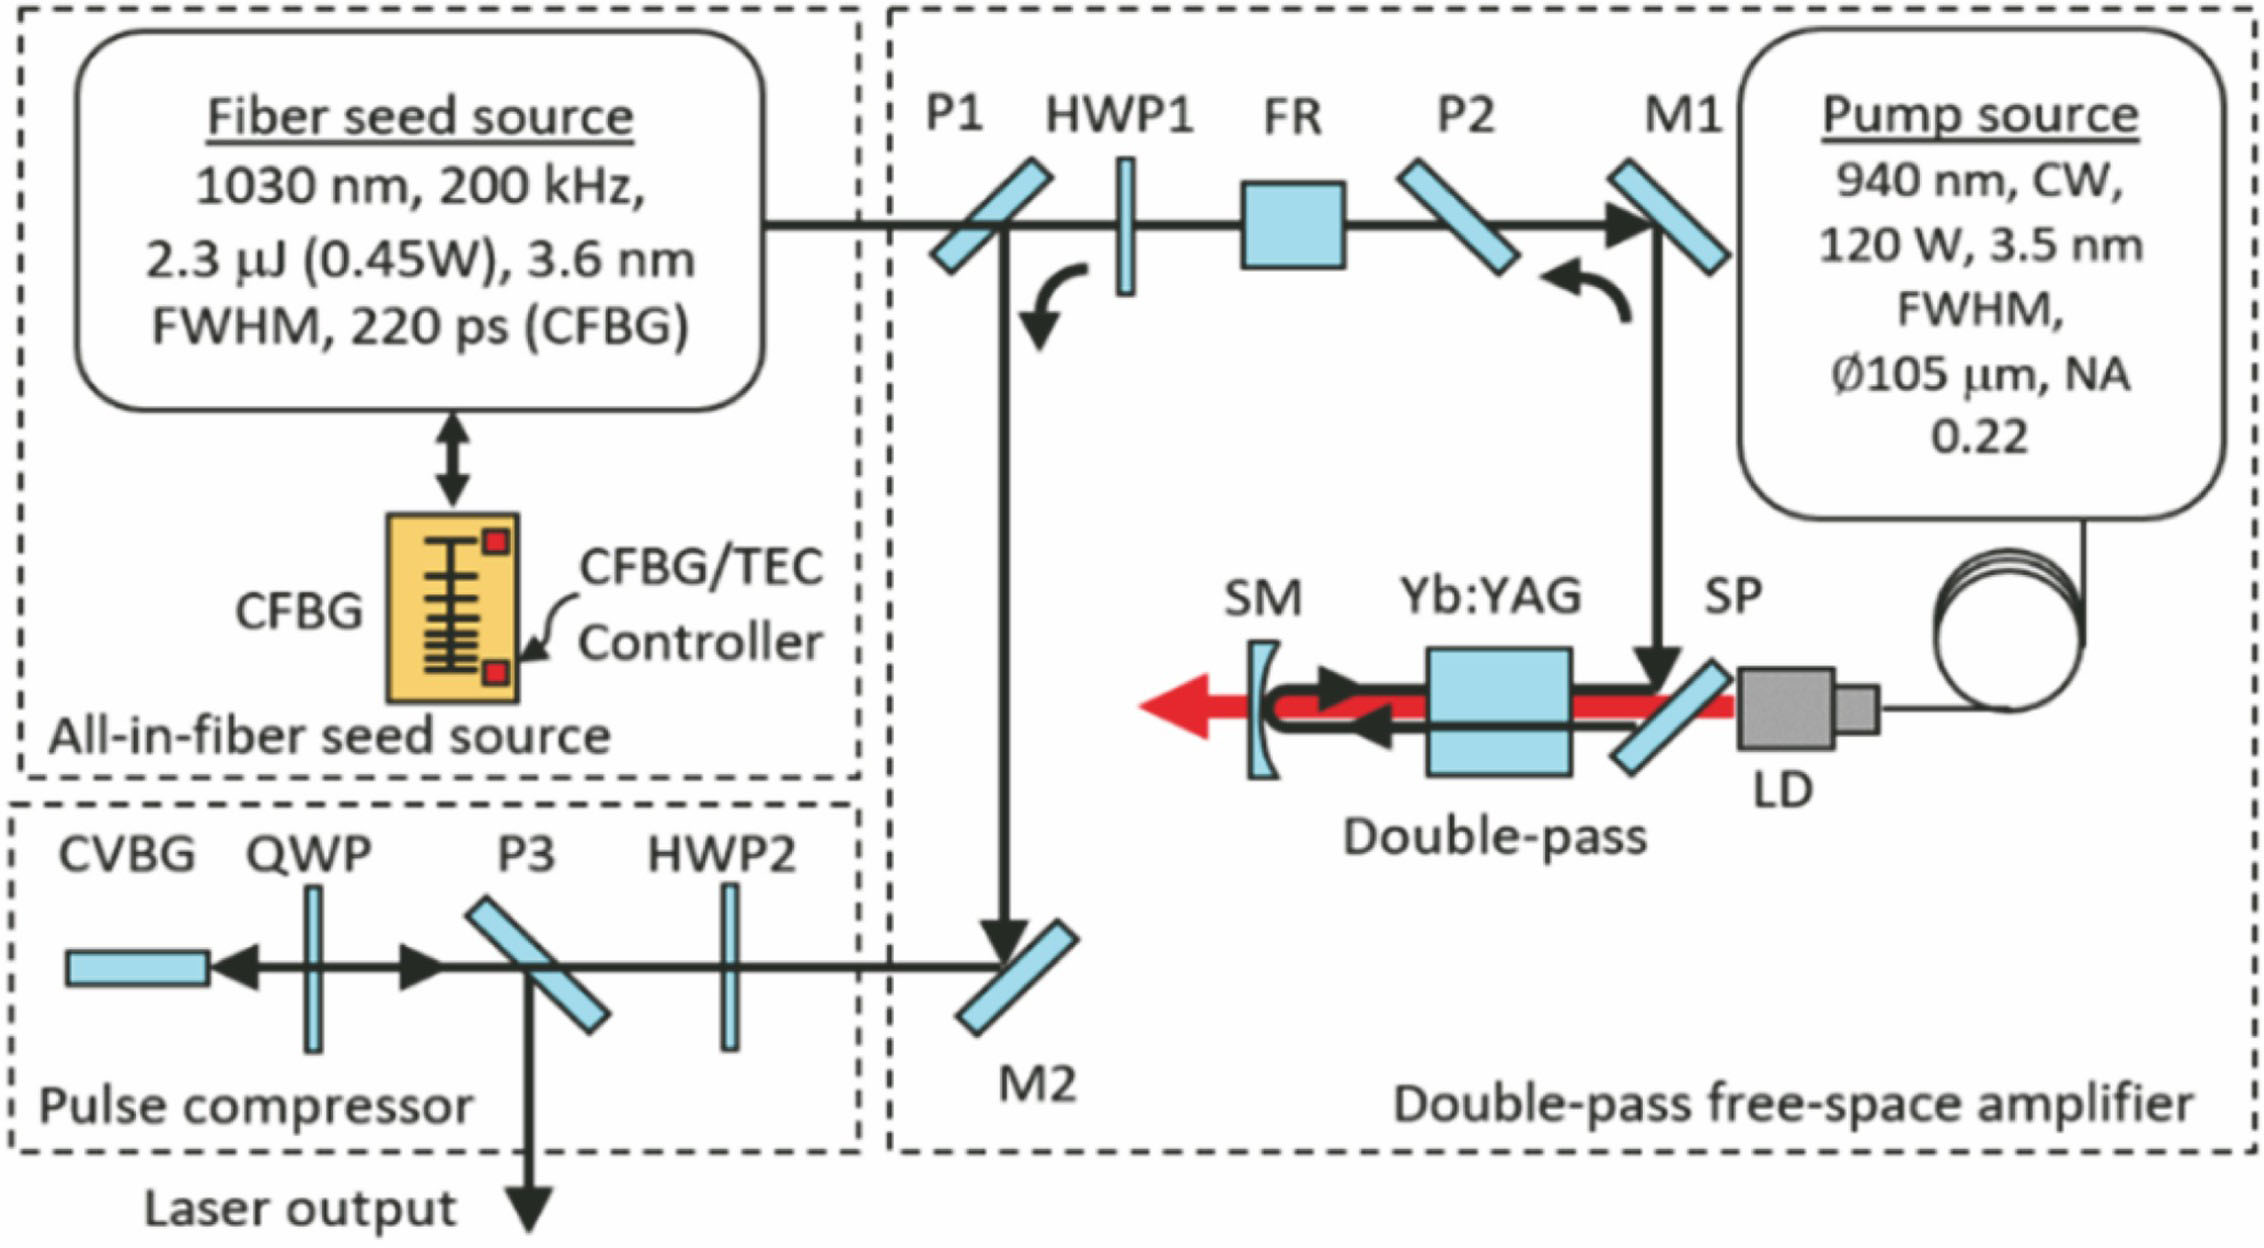 Experimental setup for two-pass Yb∶YAG chirped pulse amplification[23]